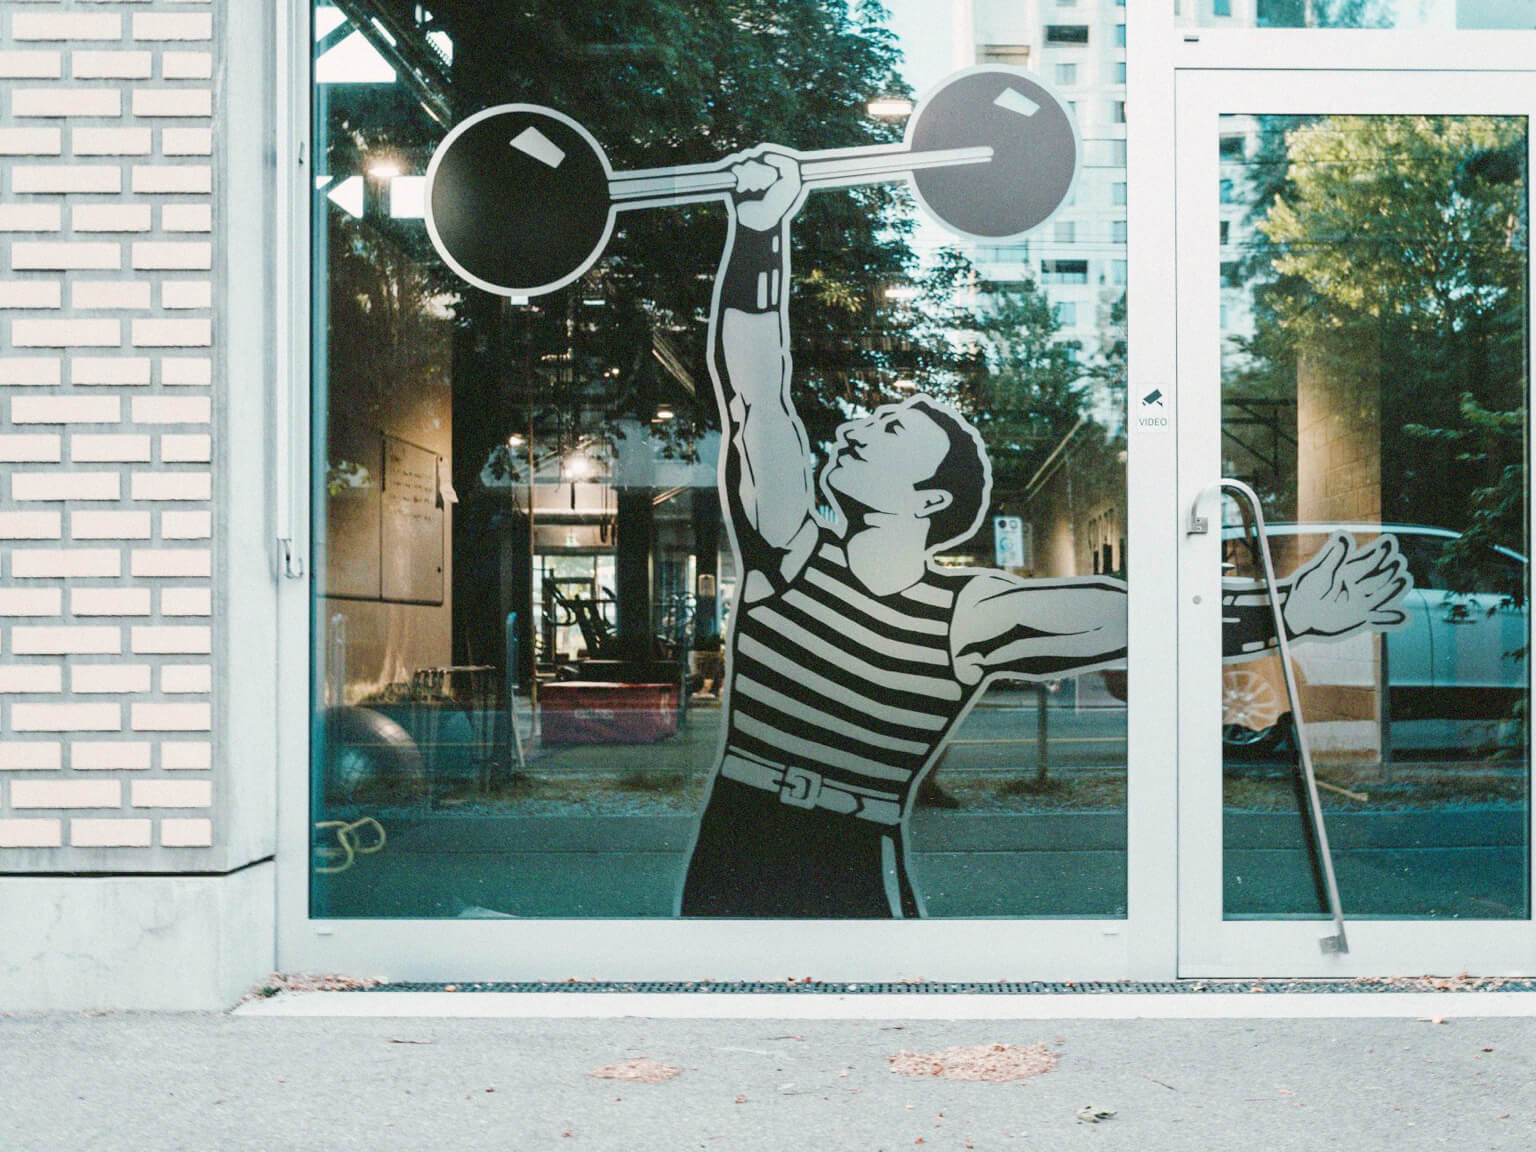 Exterior of gym with vintage window decal of person holding a retro weight.